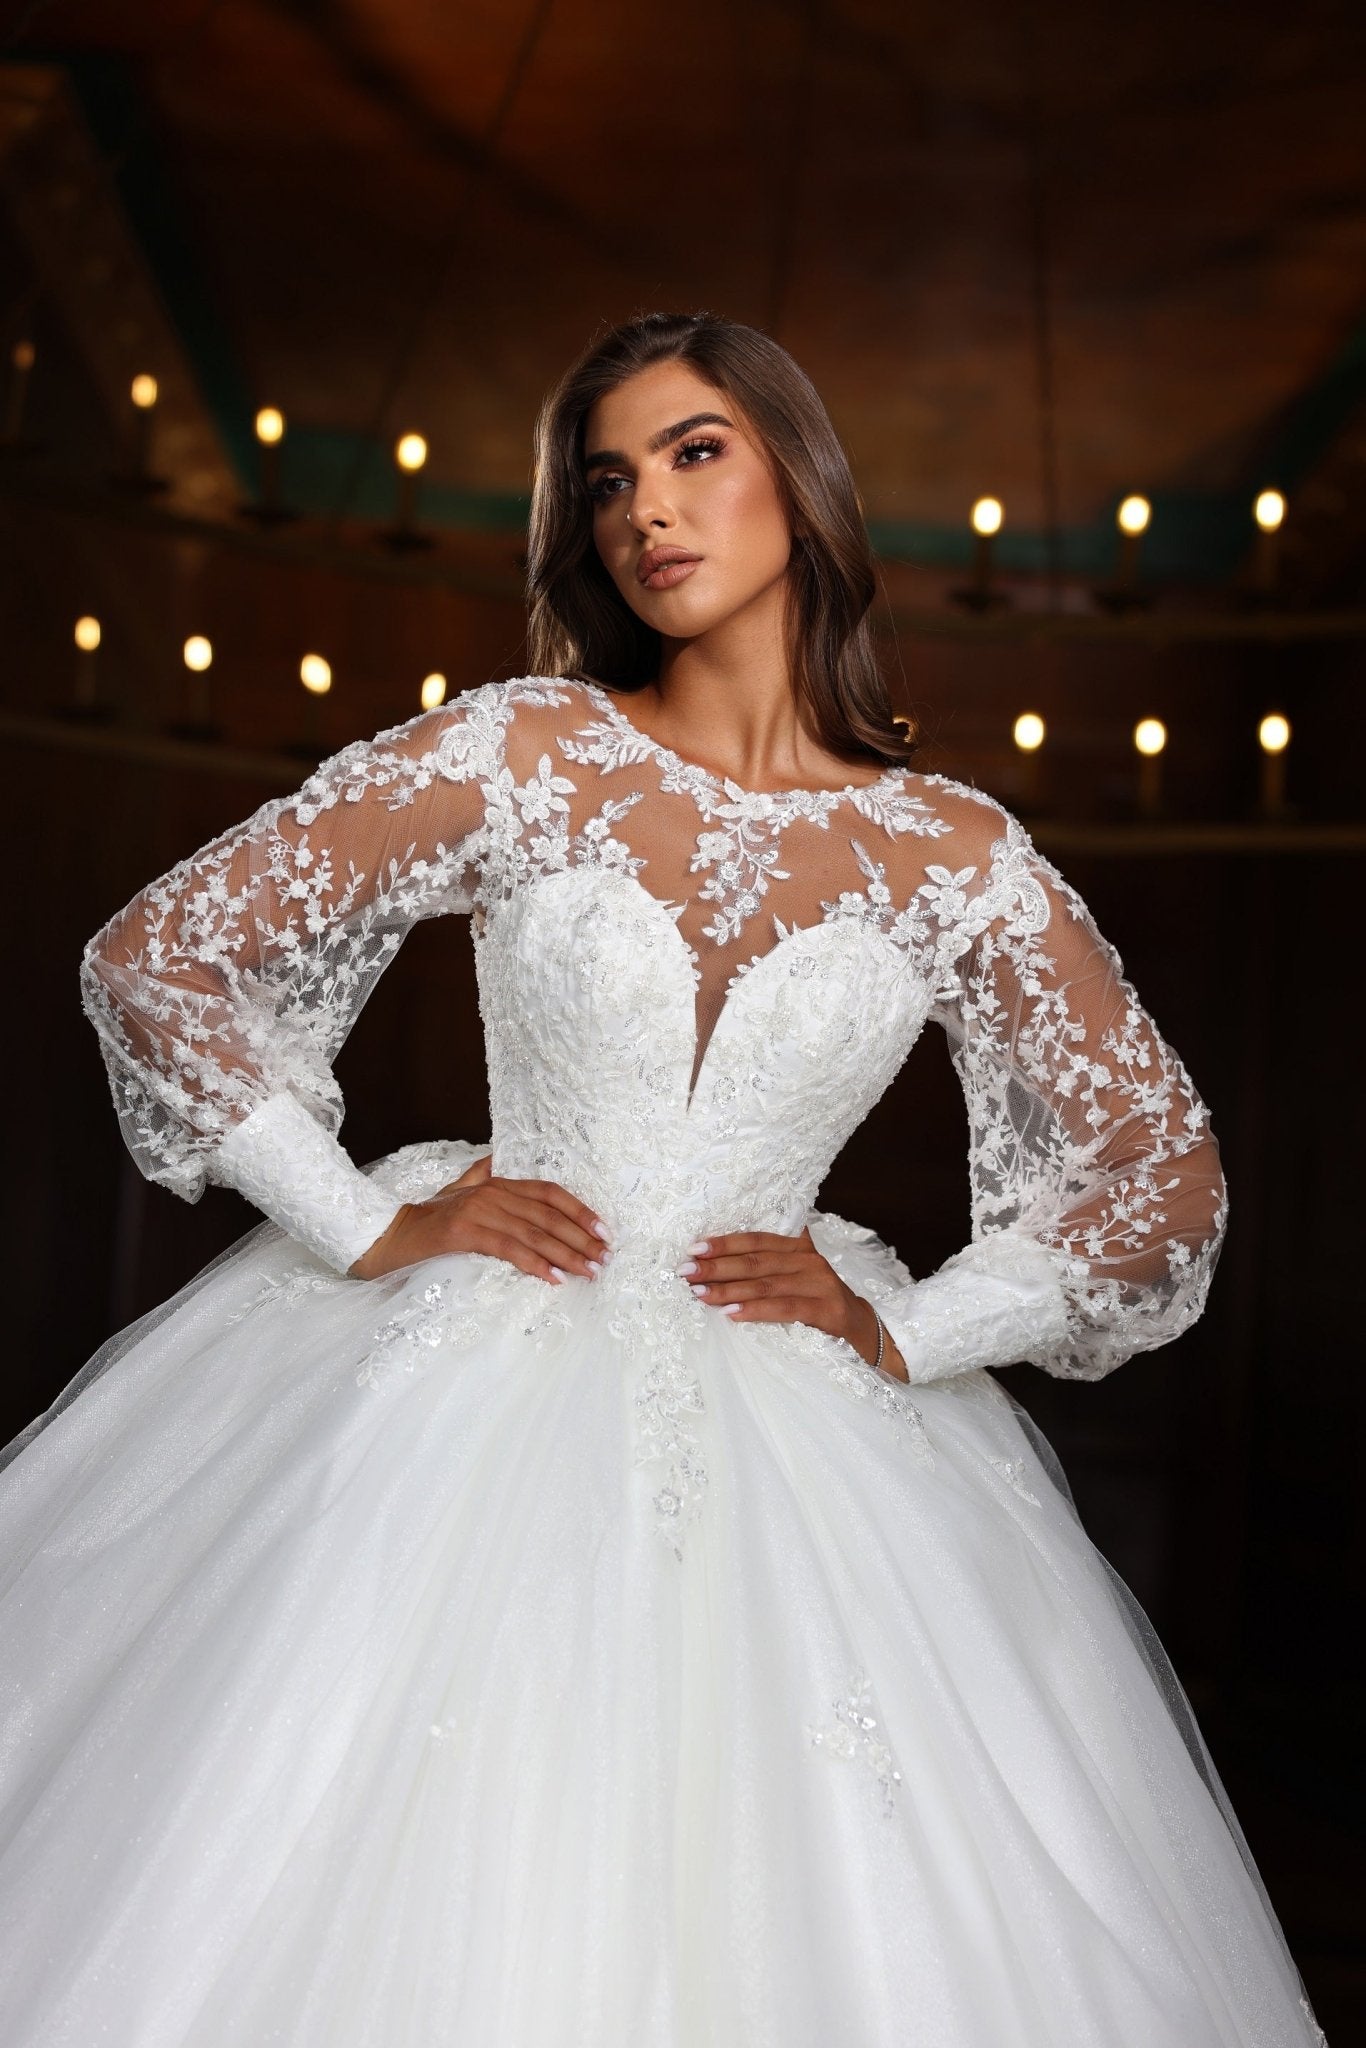 Timeless Ball Gown Wedding Dress with Plunging V-Neck and Delicate Lace Sleeves Plus Size - WonderlandByLilian